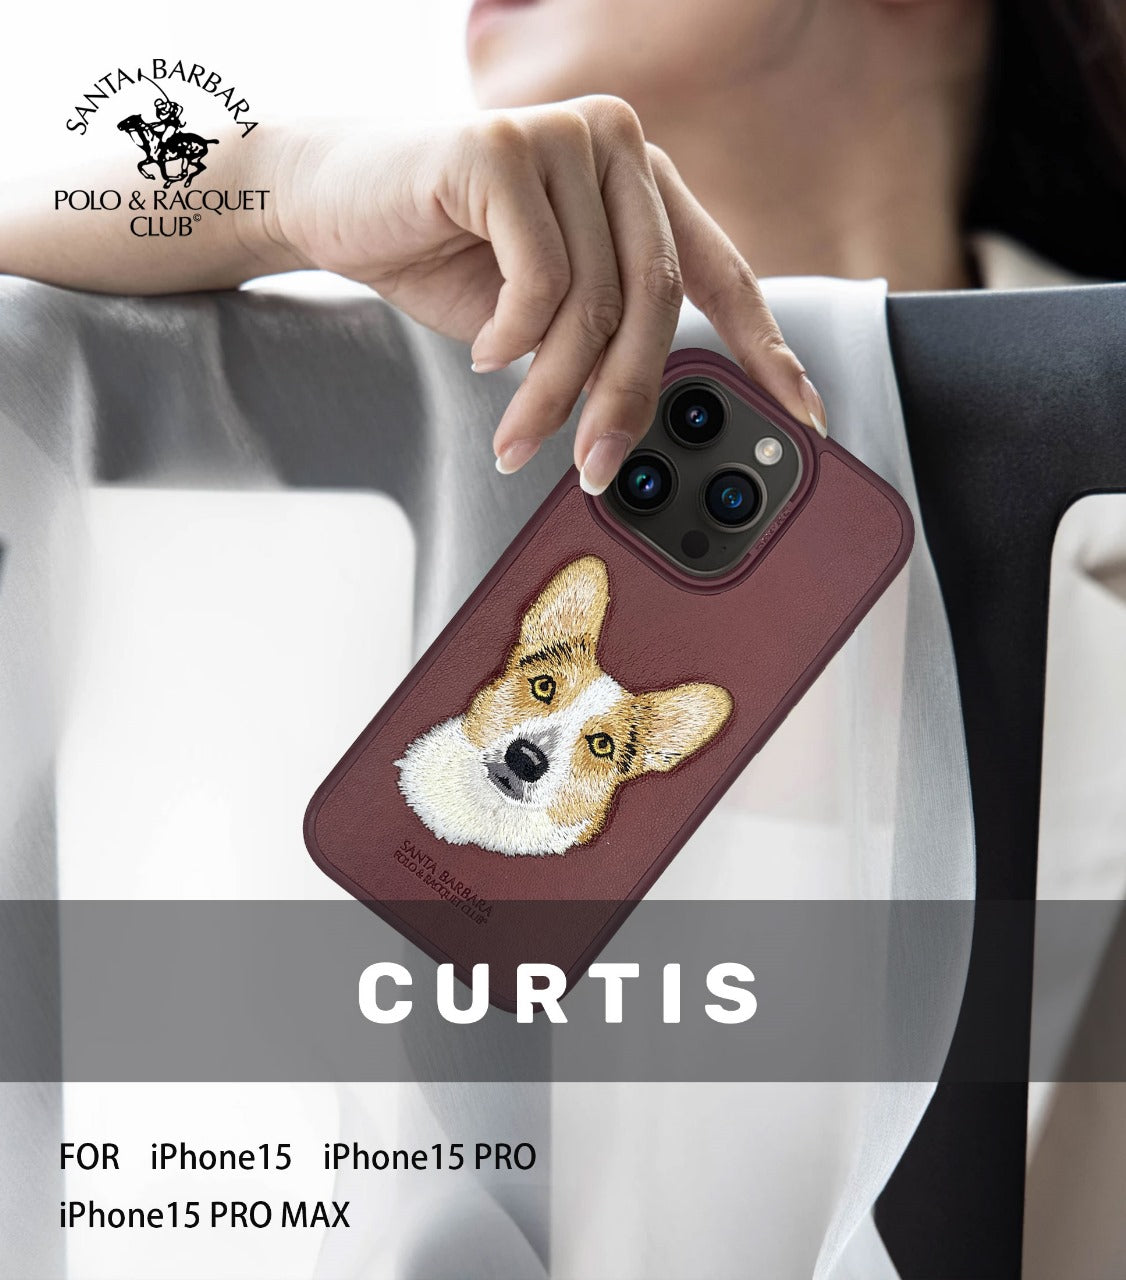 Polo Apple Curtis Compatible for iPhone 15 Pro & 15 Pro Max